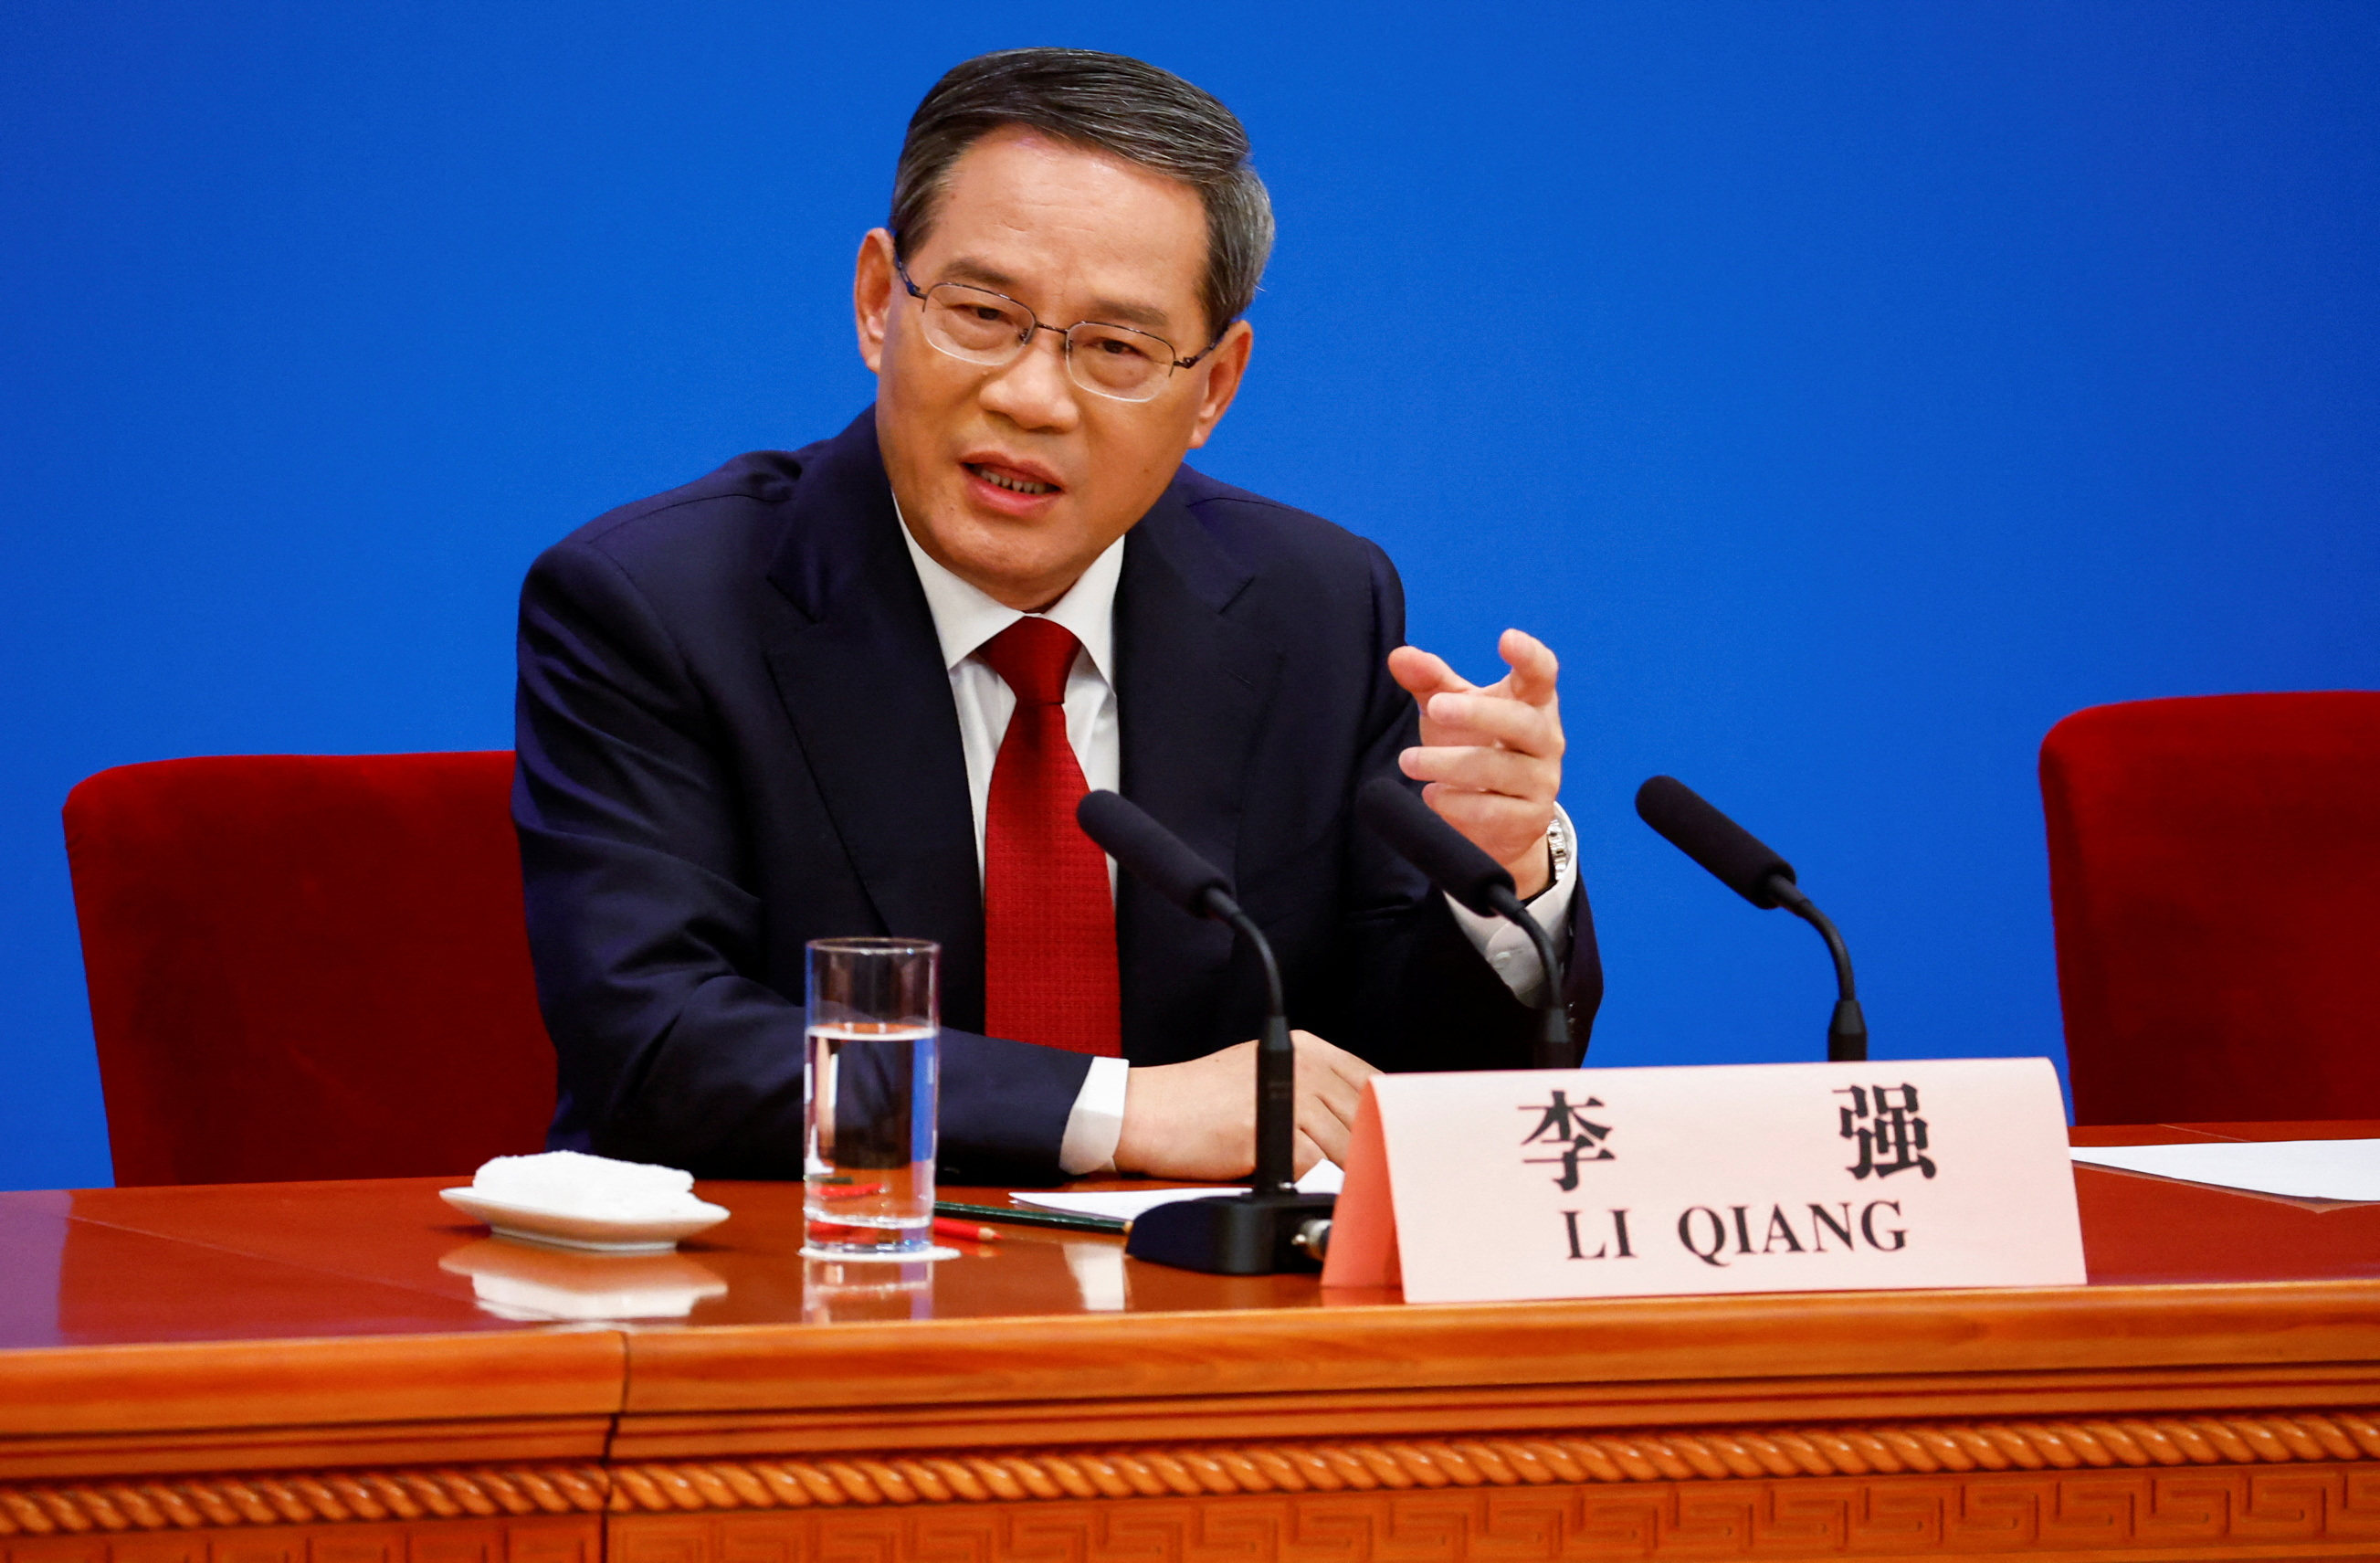 Chinese Premier Li Qiang at a news conference following the closing session of the National People’s Congress in Beijing on Monday. Photo: Reuters